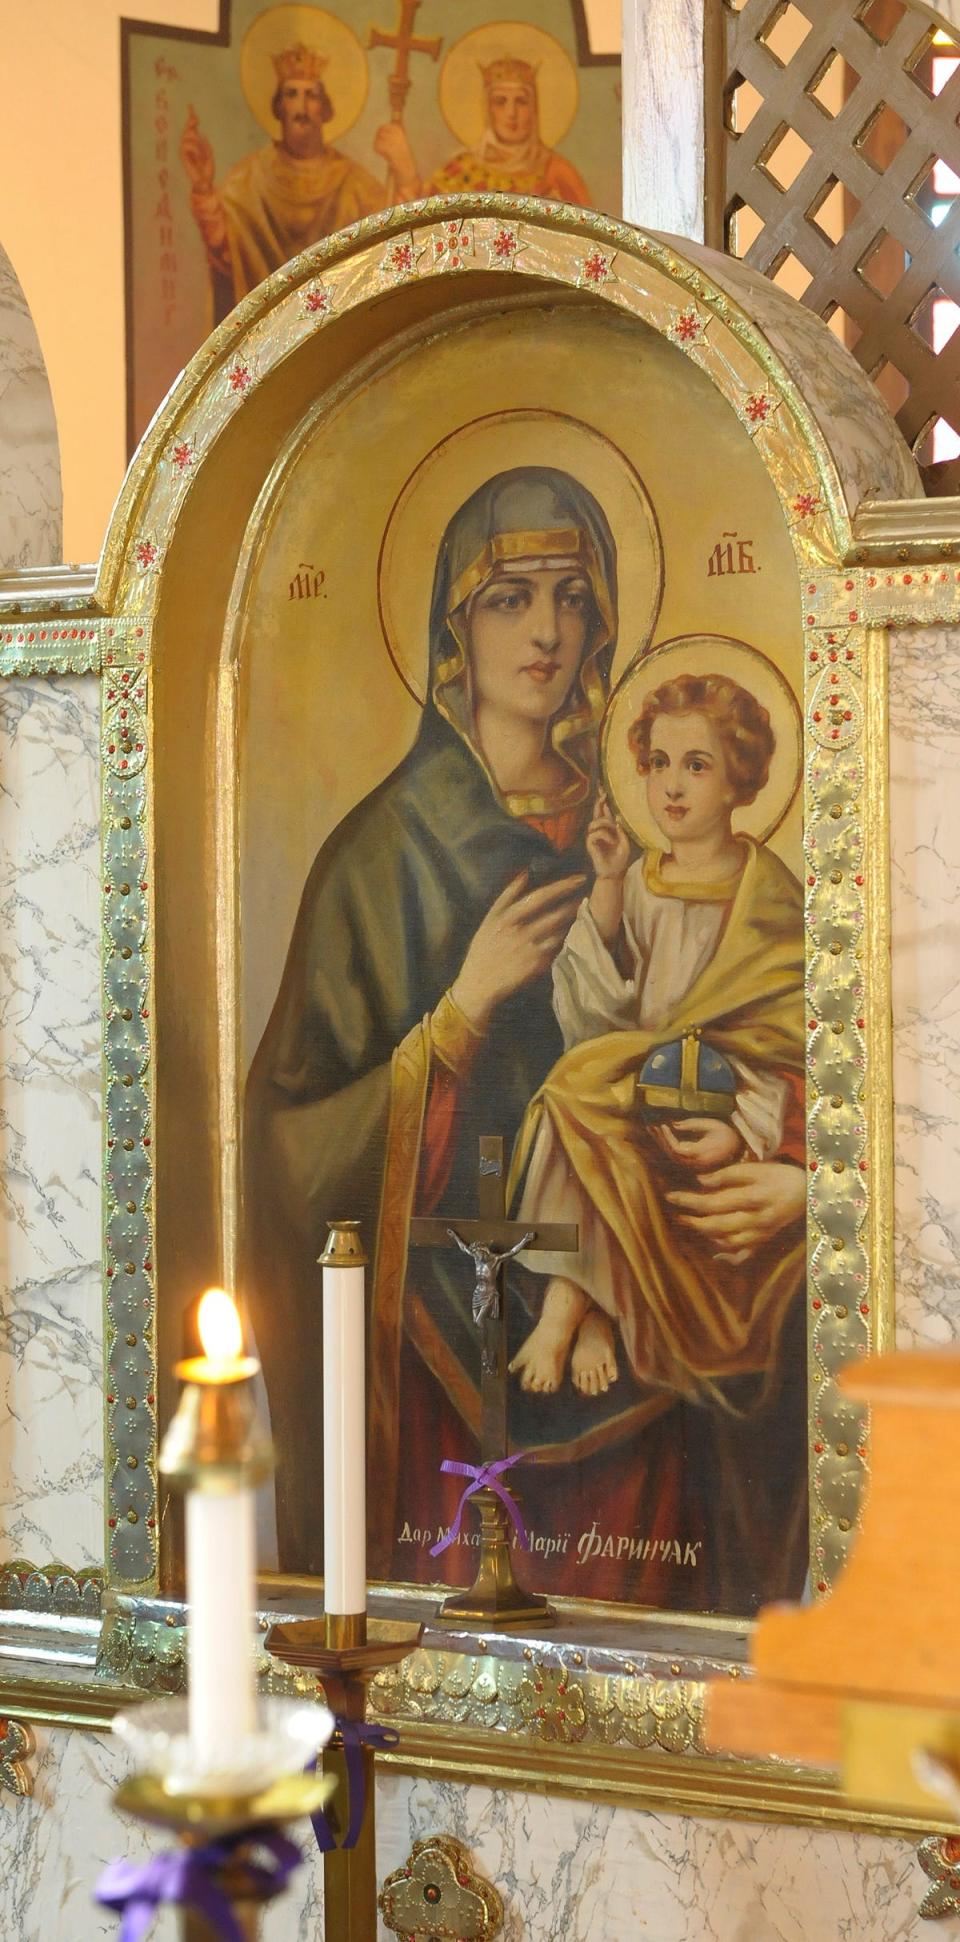 A painting of the Madonna and Child is in the sanctuary of the St. John the Baptist Ukrainian Catholic Church, along with other icons and artworks of faith in 2014.